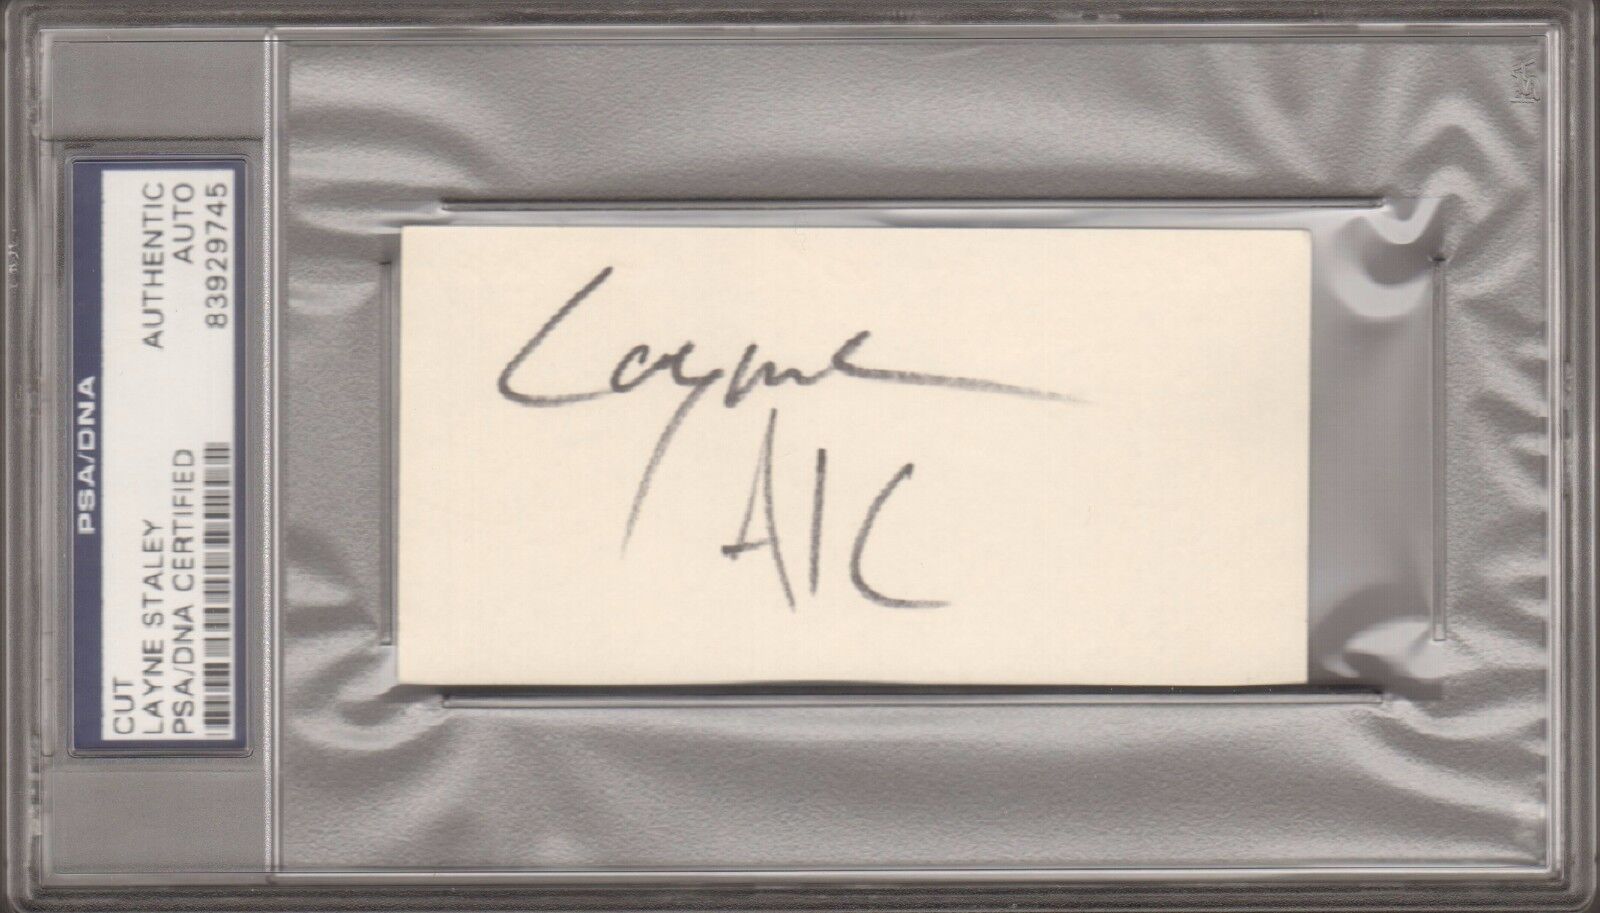 LAYNE STALEY Signed Autographed ALICE IN CHAINS Cut PSA/DNA SLABBED #83929745